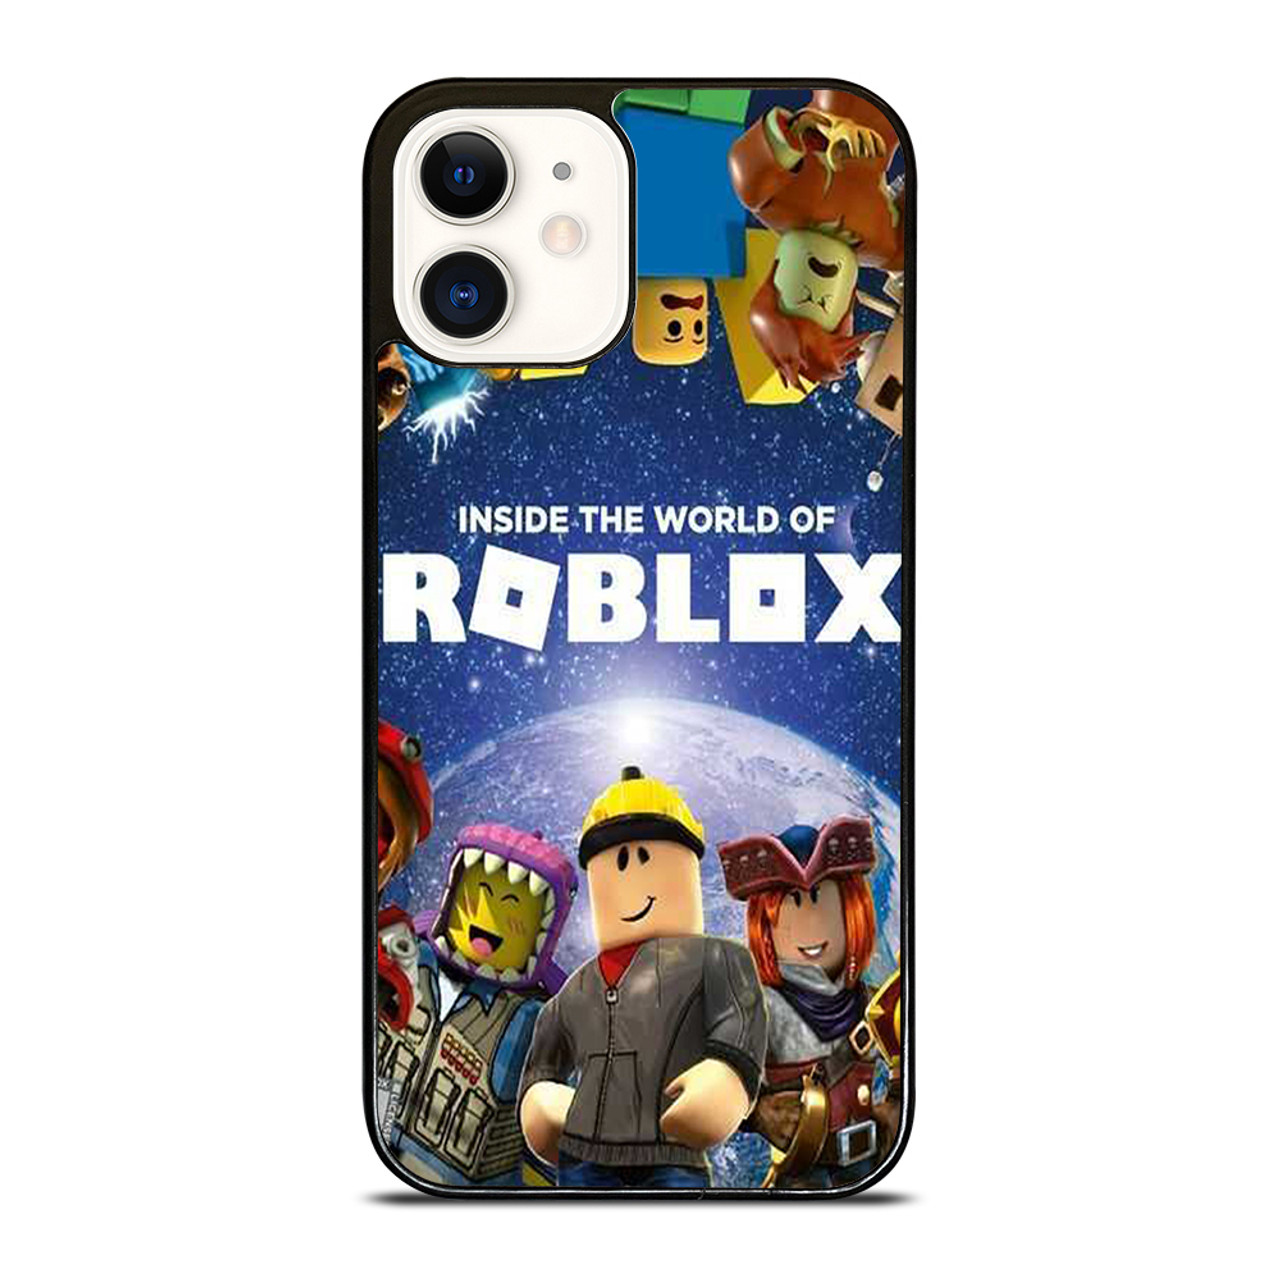 Dead noob roblox iPhone 12 Case by Vacy Poligree - Pixels